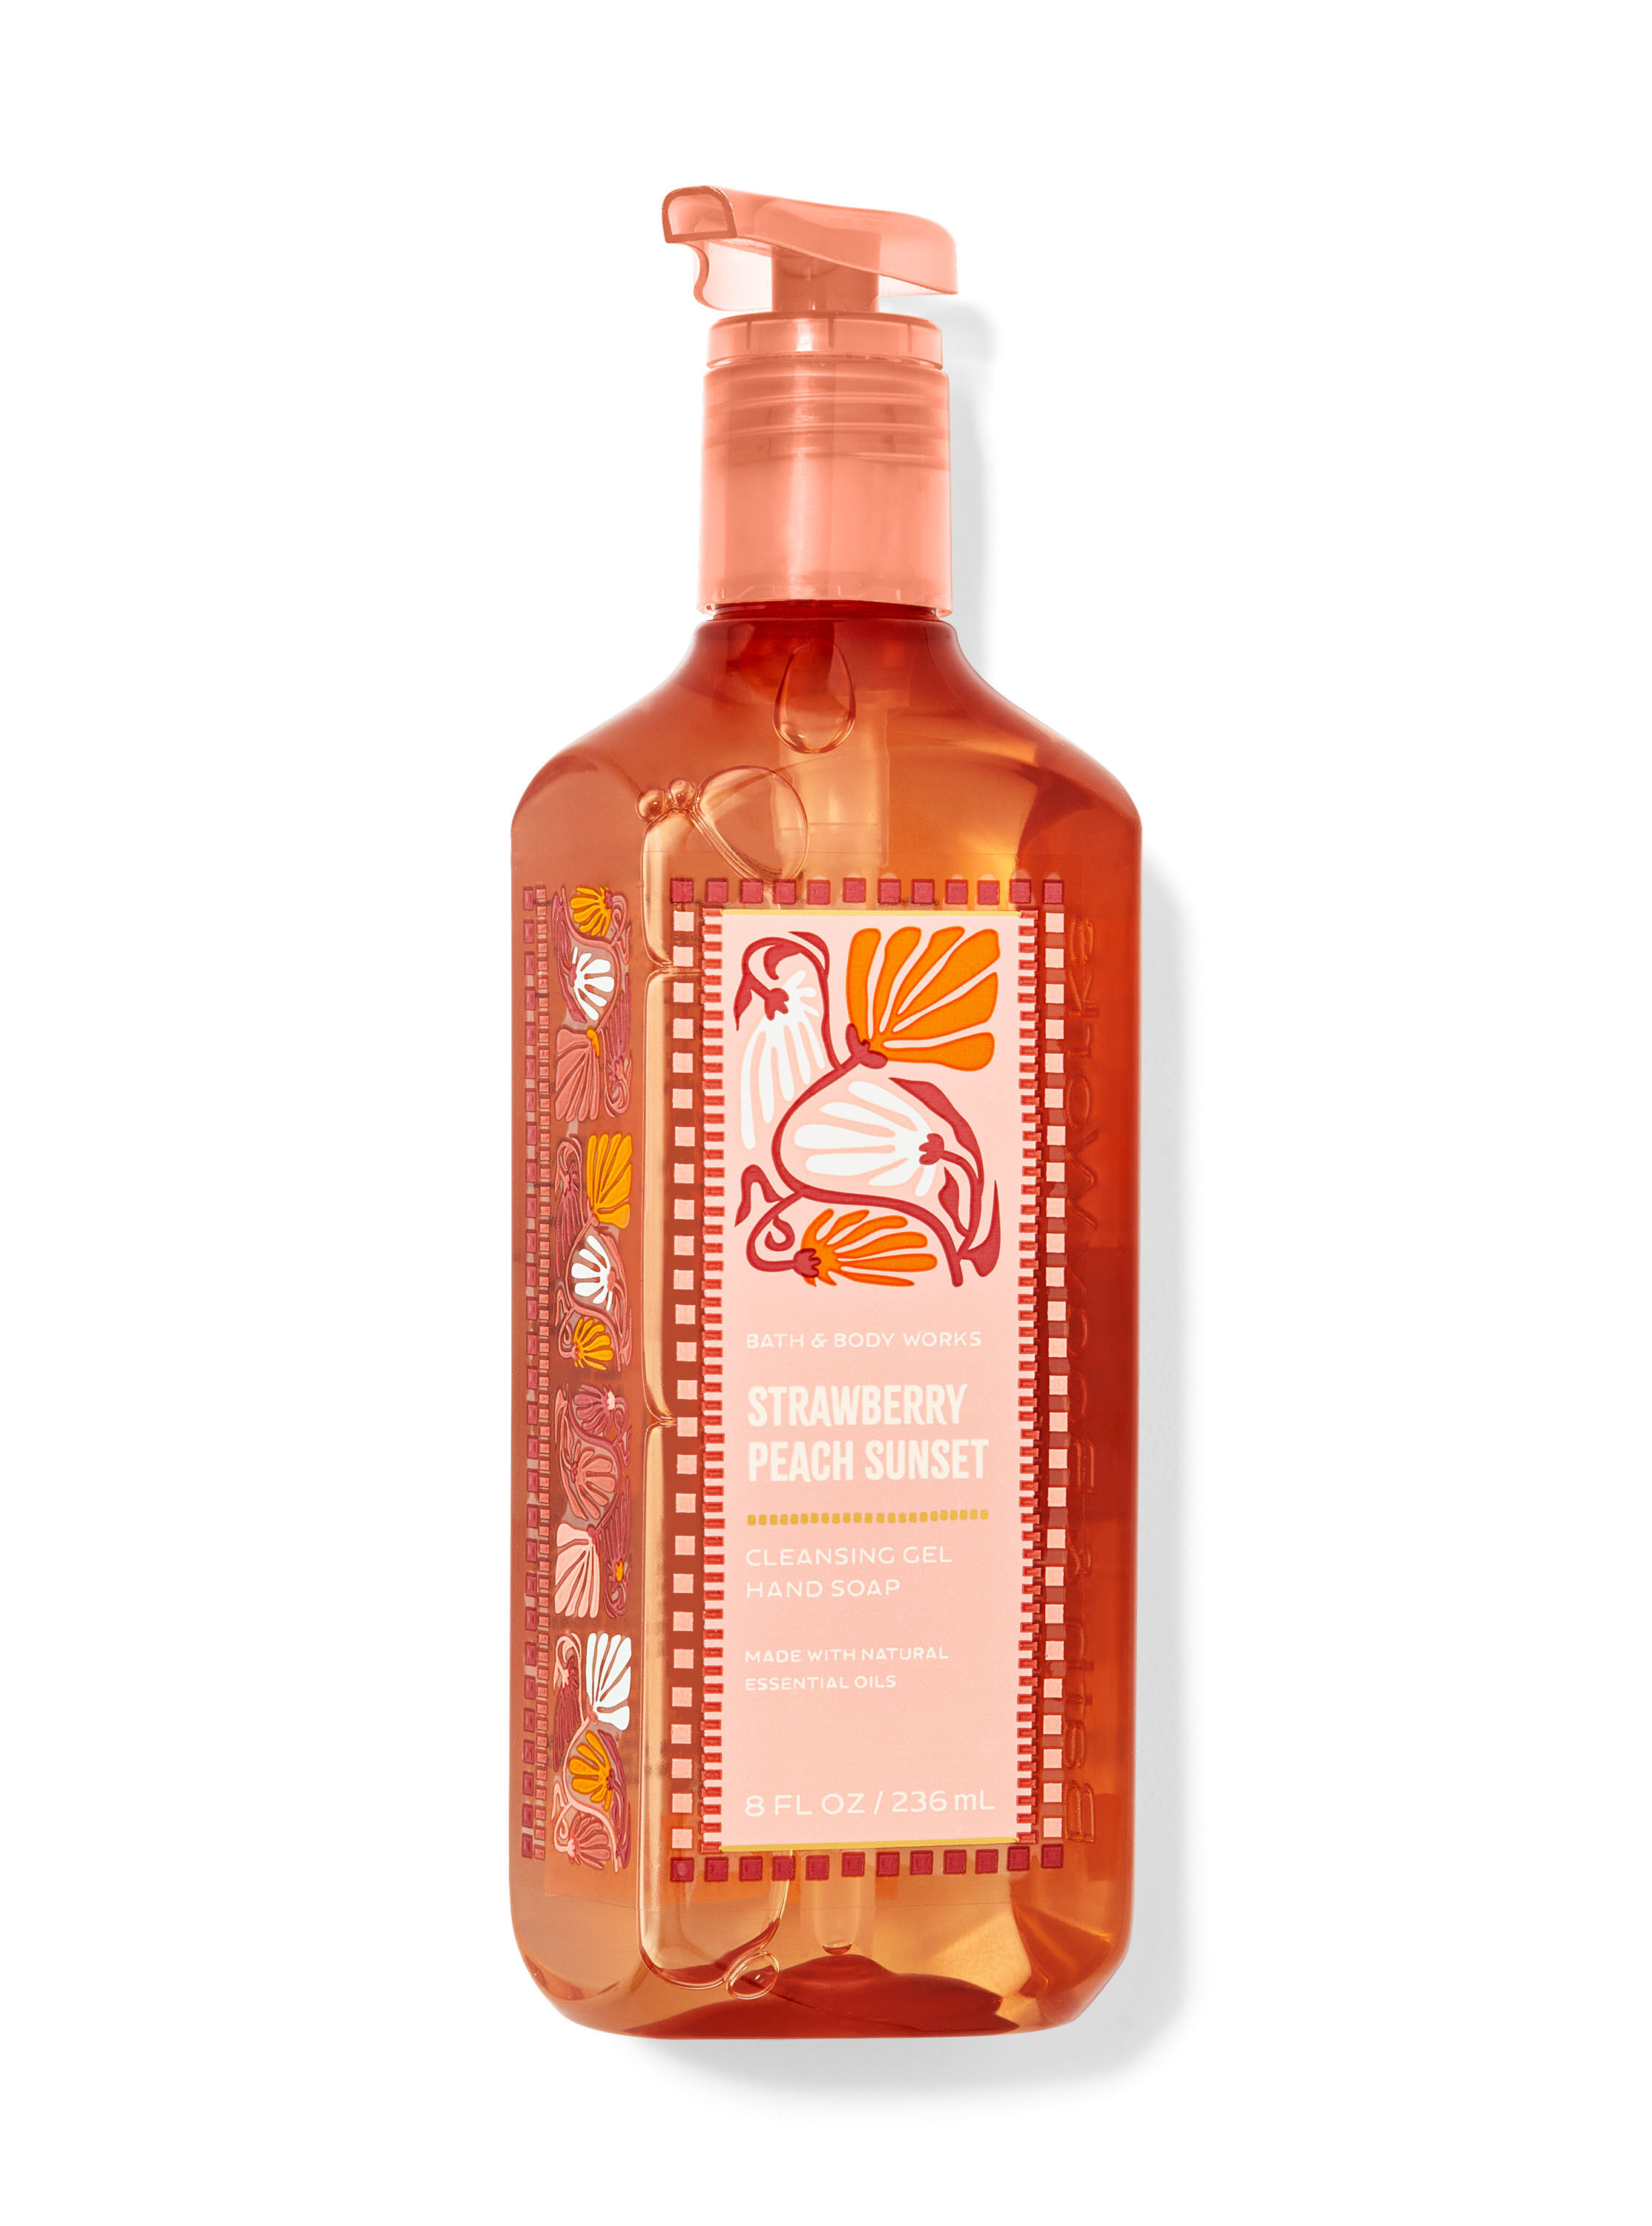 Strawberry Peach Sunset Cleansing Gel Hand Soap